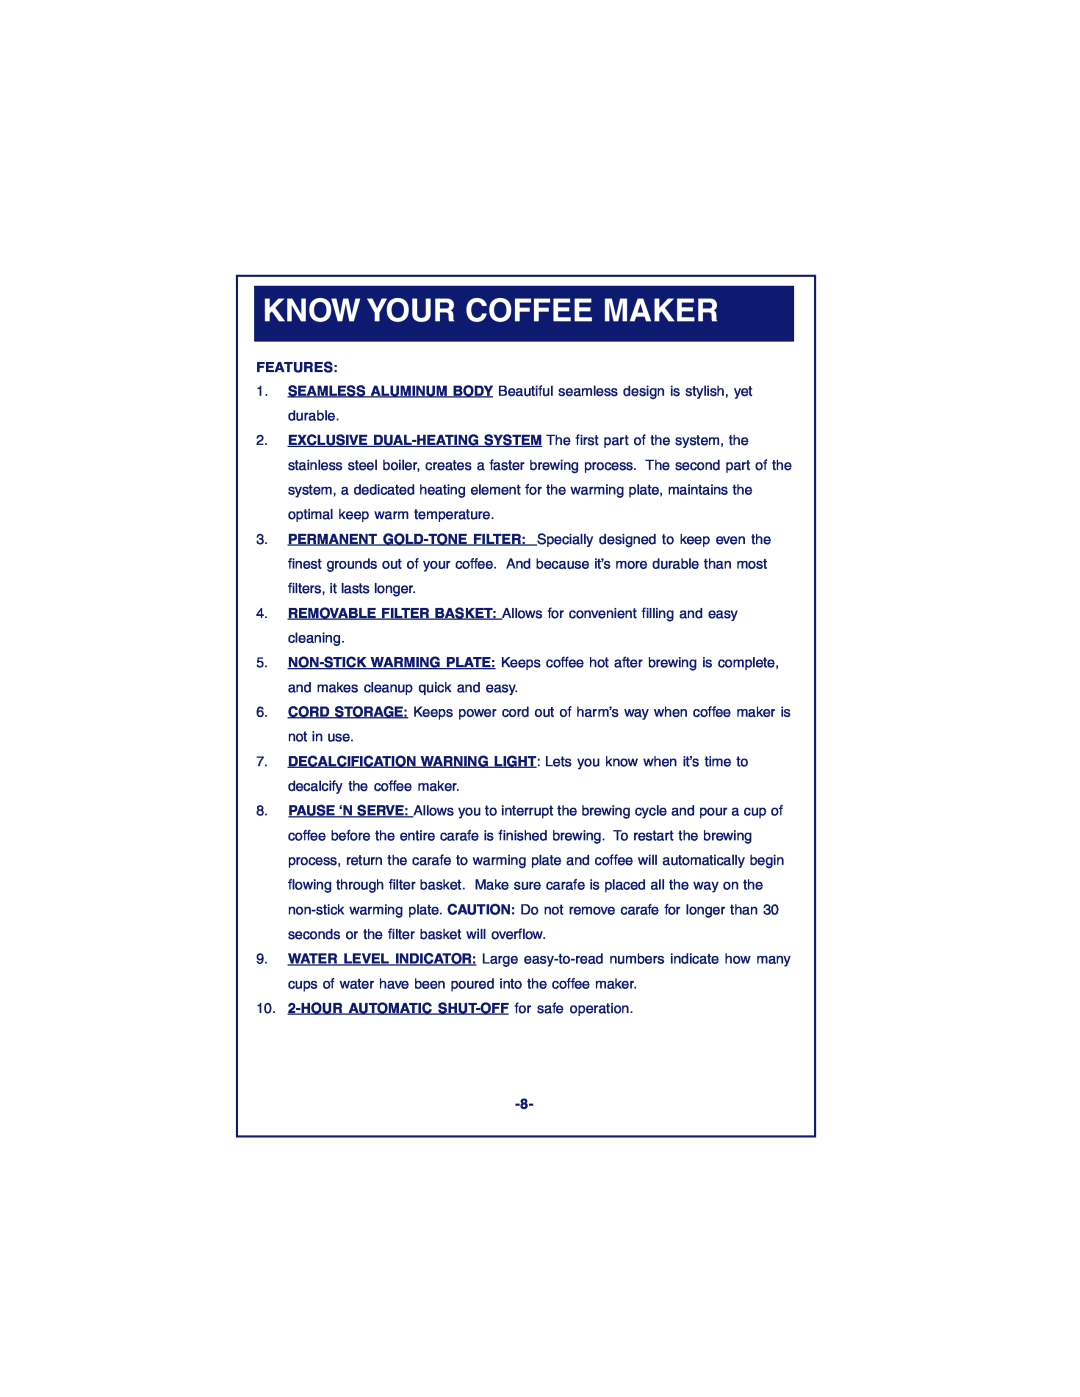 DeLonghi DCM900 instruction manual Know Your Coffee Maker, Features, HOURAUTOMATIC SHUT-OFFfor safe operation 8 